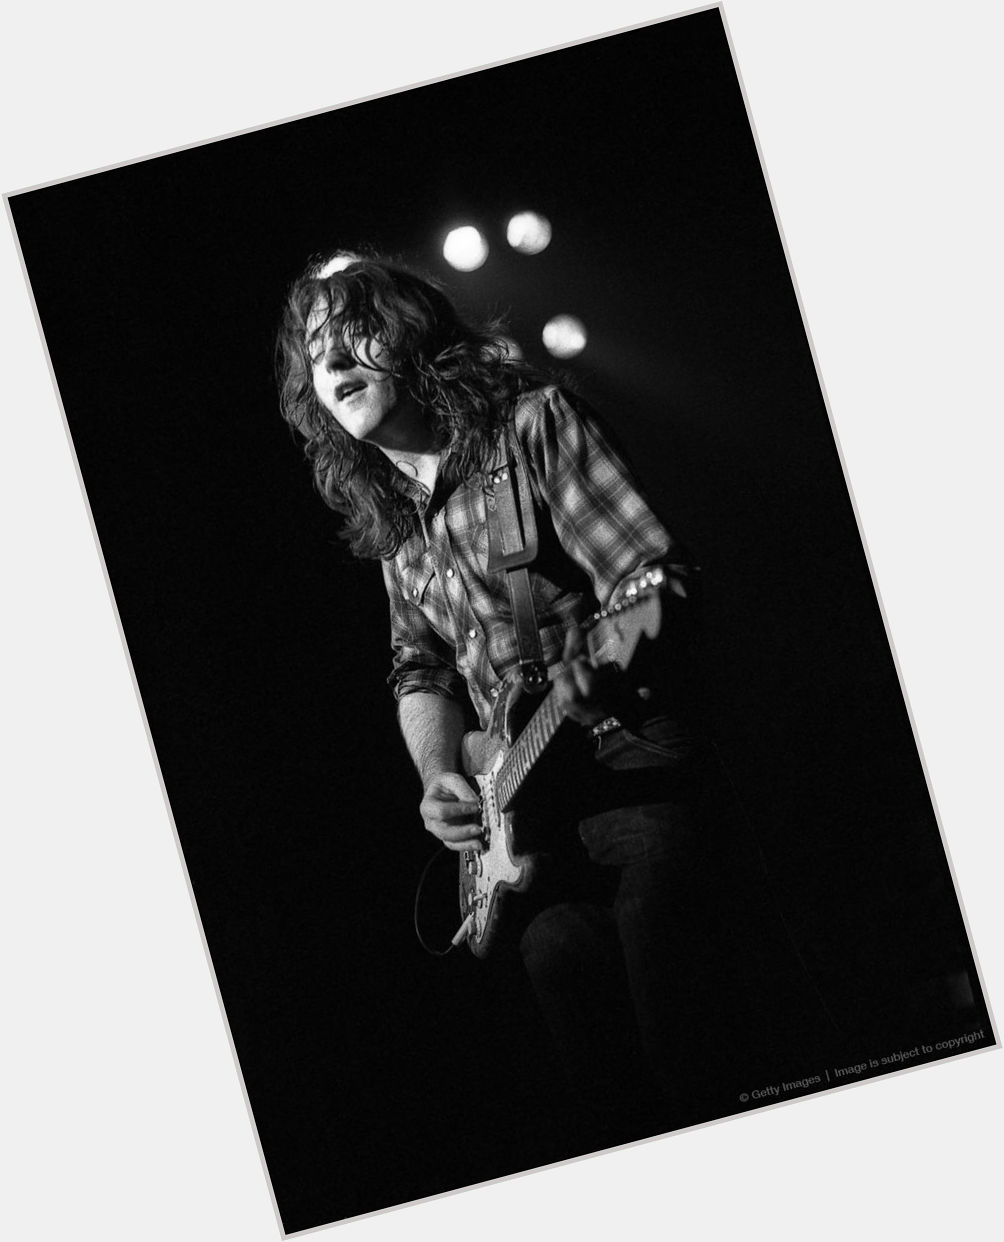 Rory Gallagher, the irish bluesman.
Happy 70th birthday up there! 